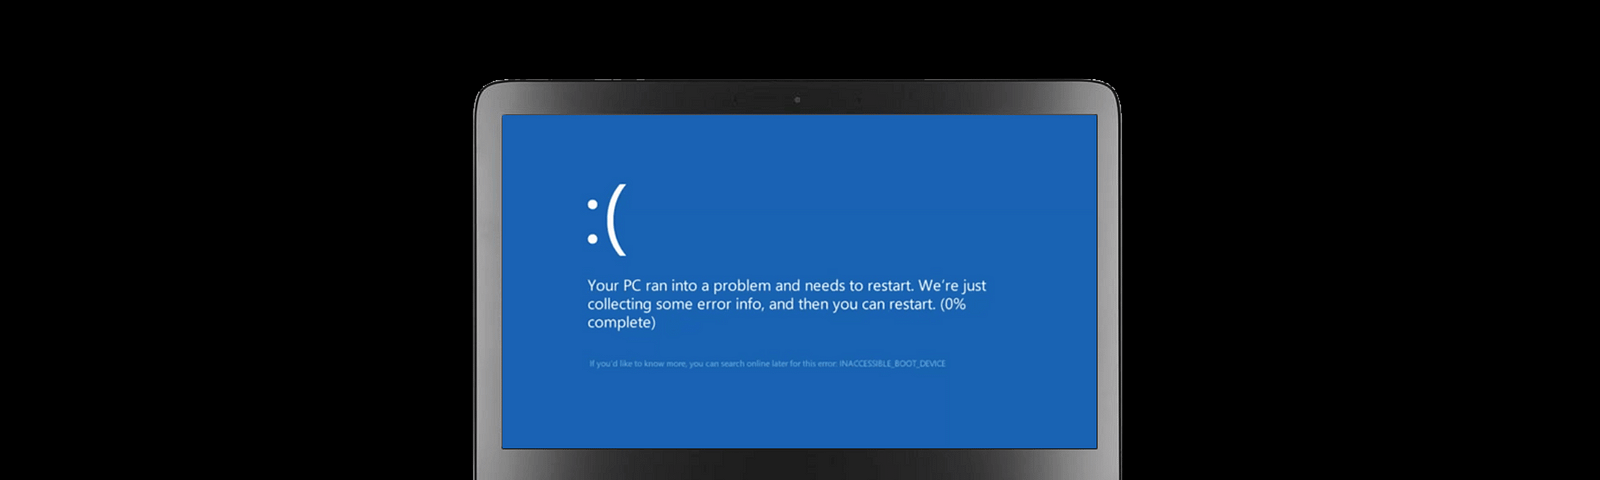 Blue Screen of Death shown on the laptop screen on a black background